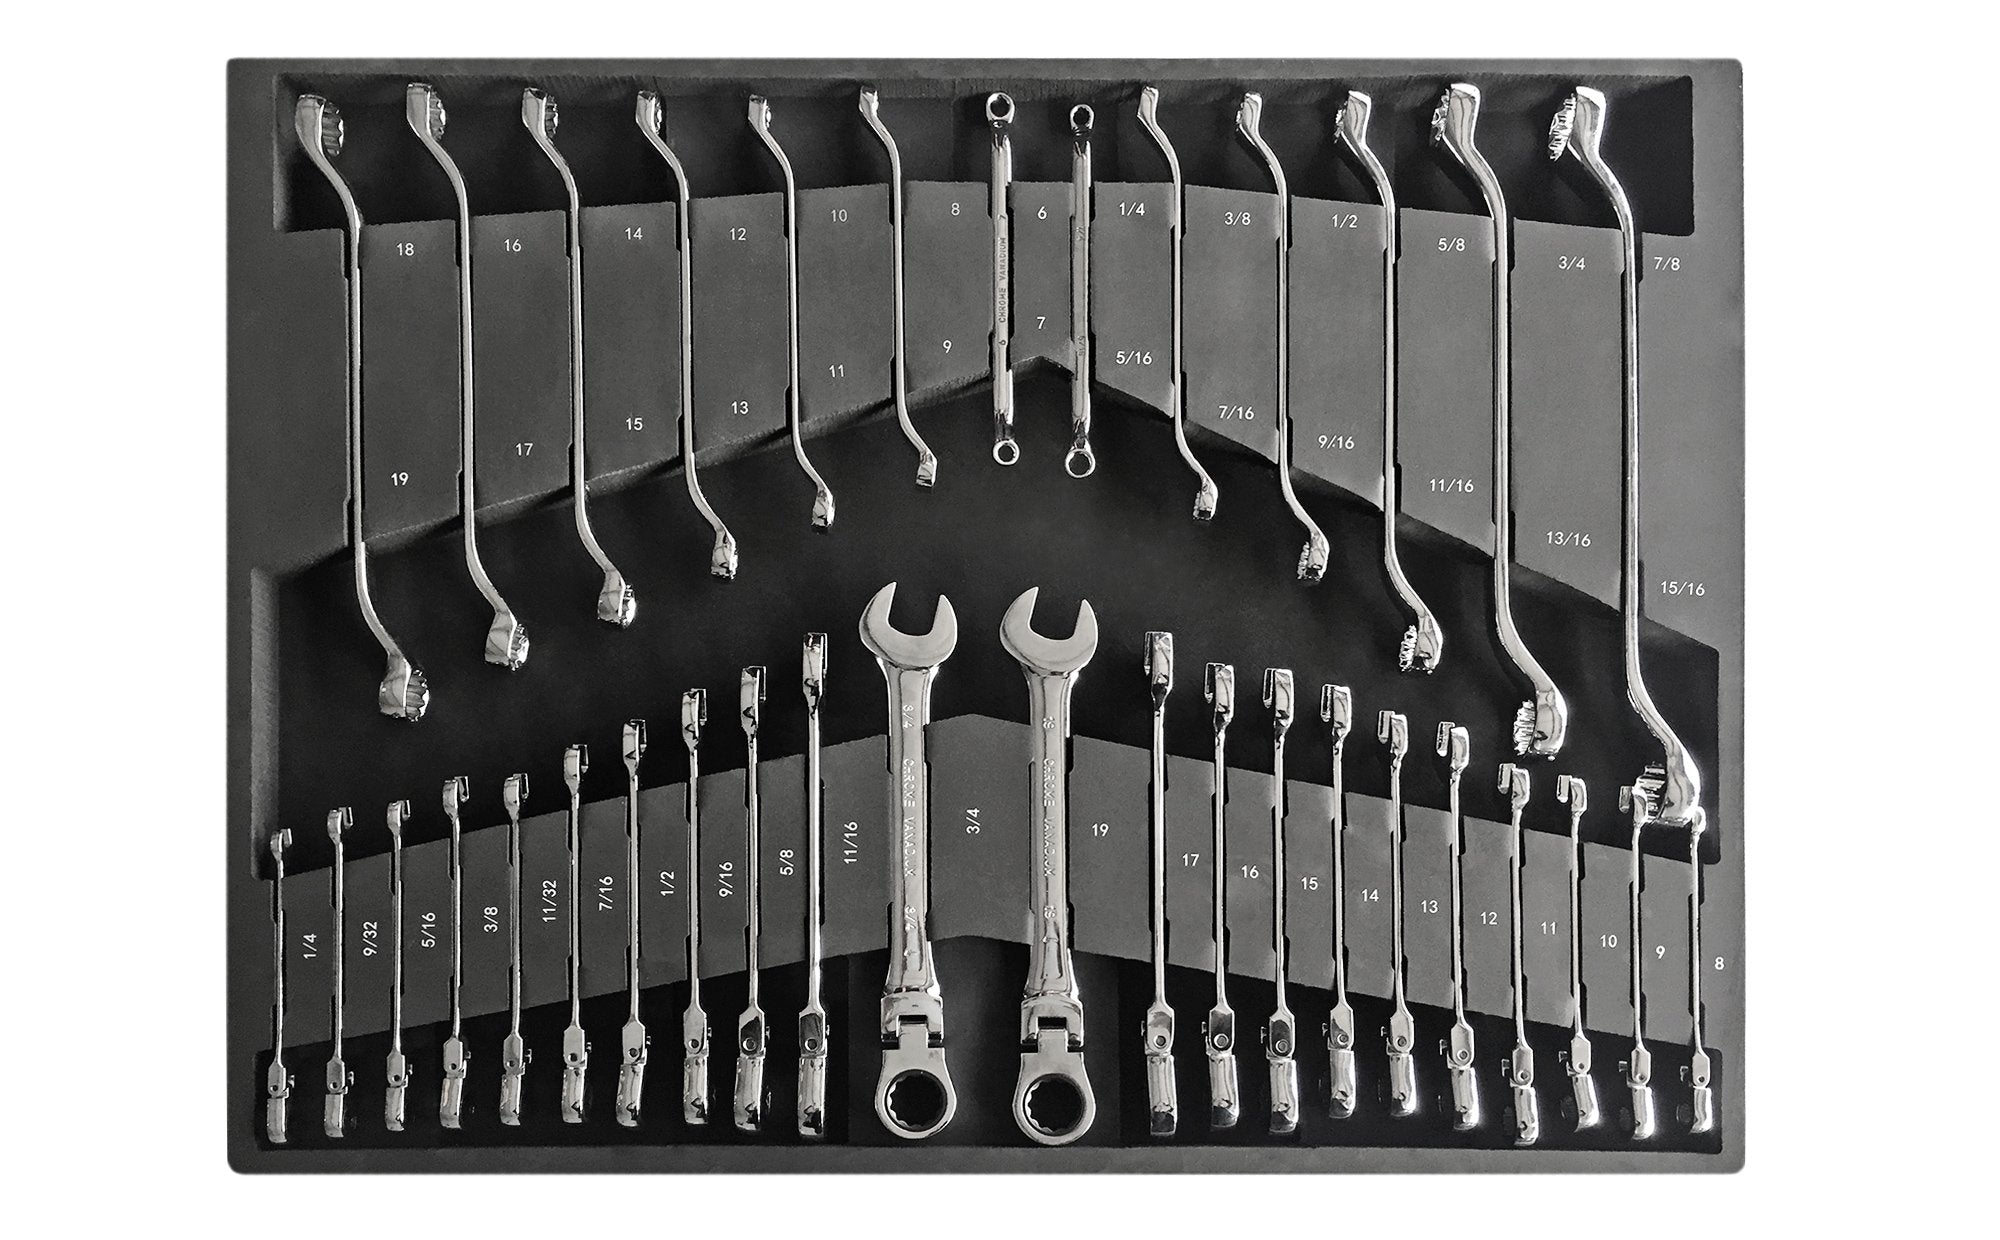 Pro Series Wrench Tray